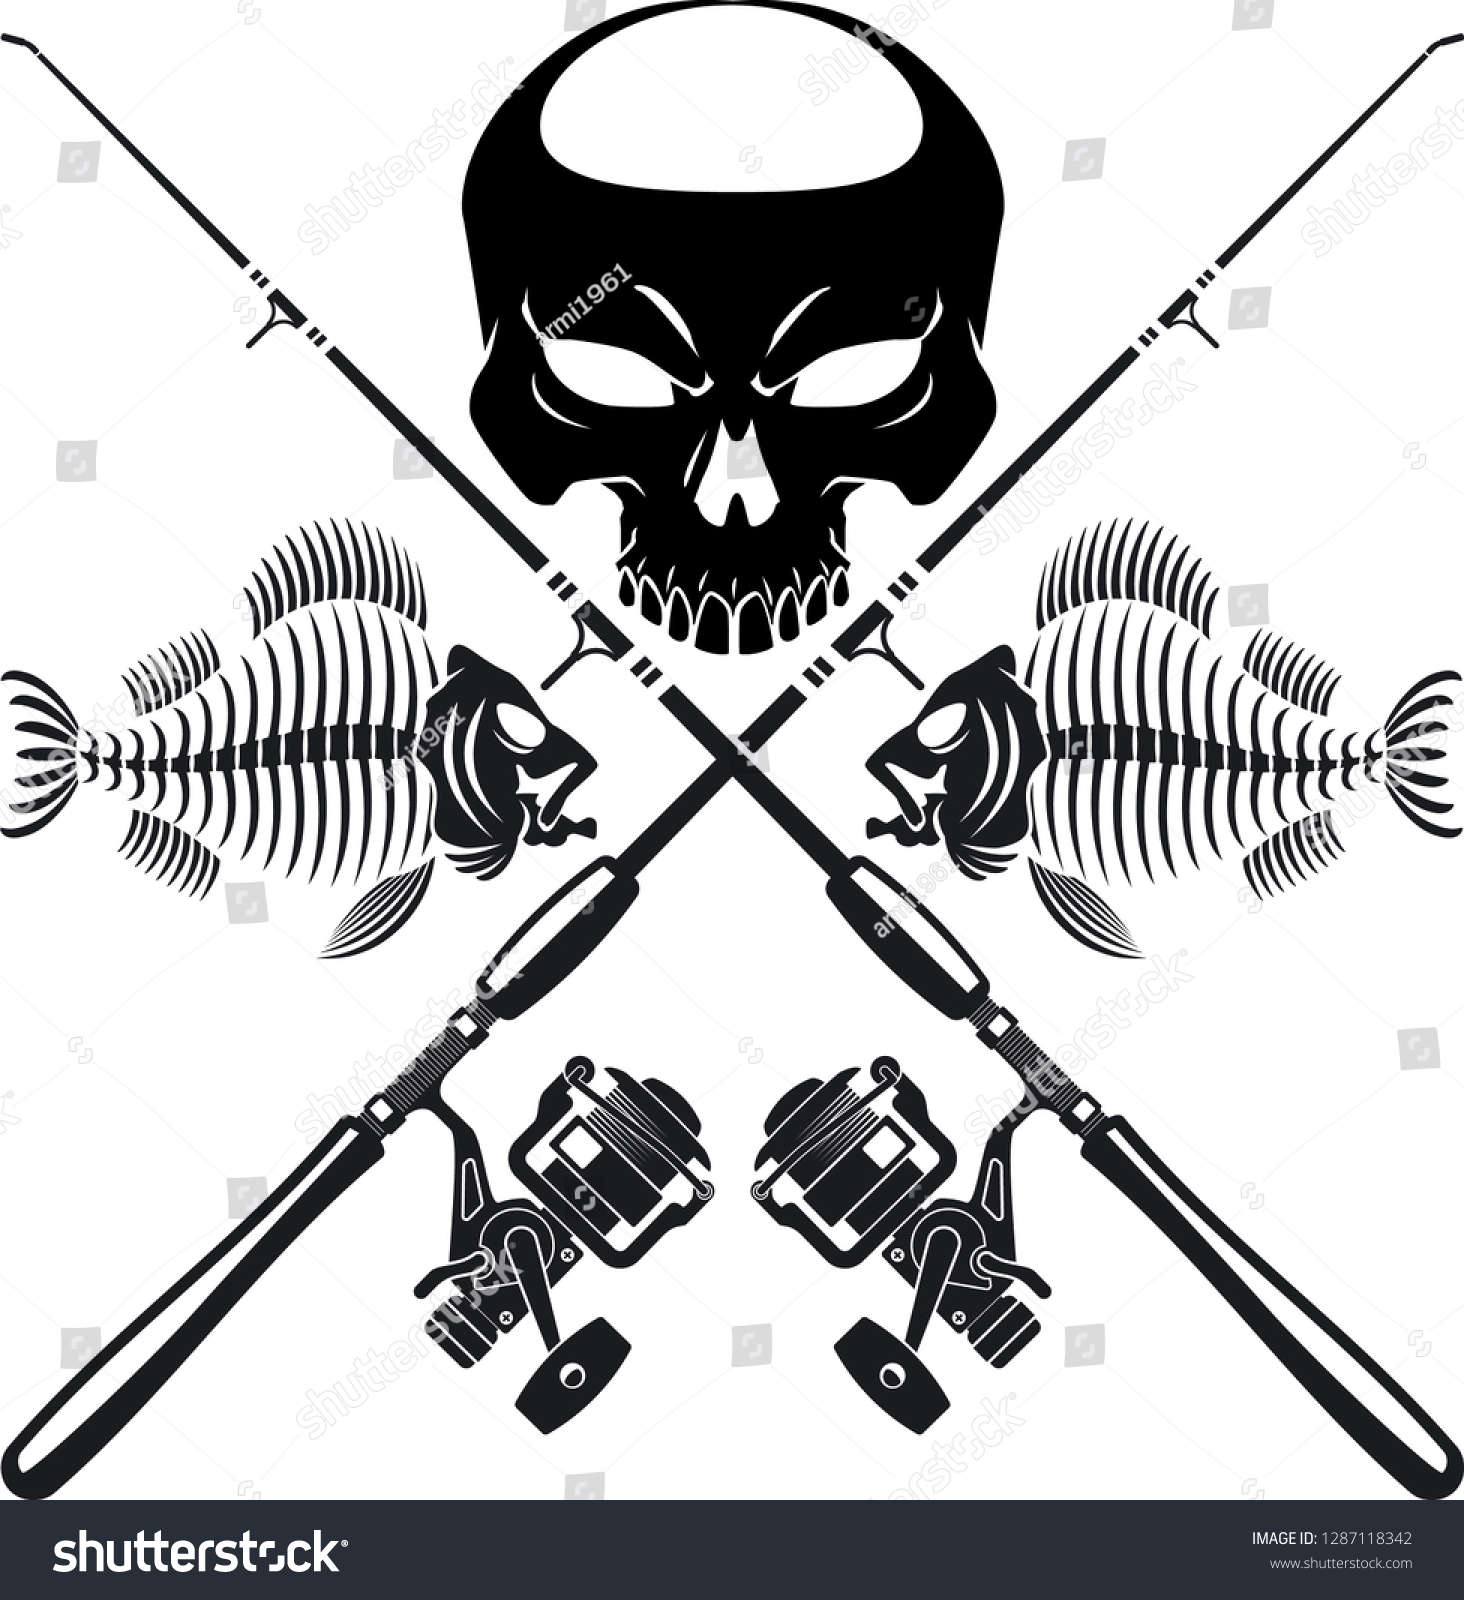 SVG of human skull and fish skeleton with crossing fishing rod and reel svg